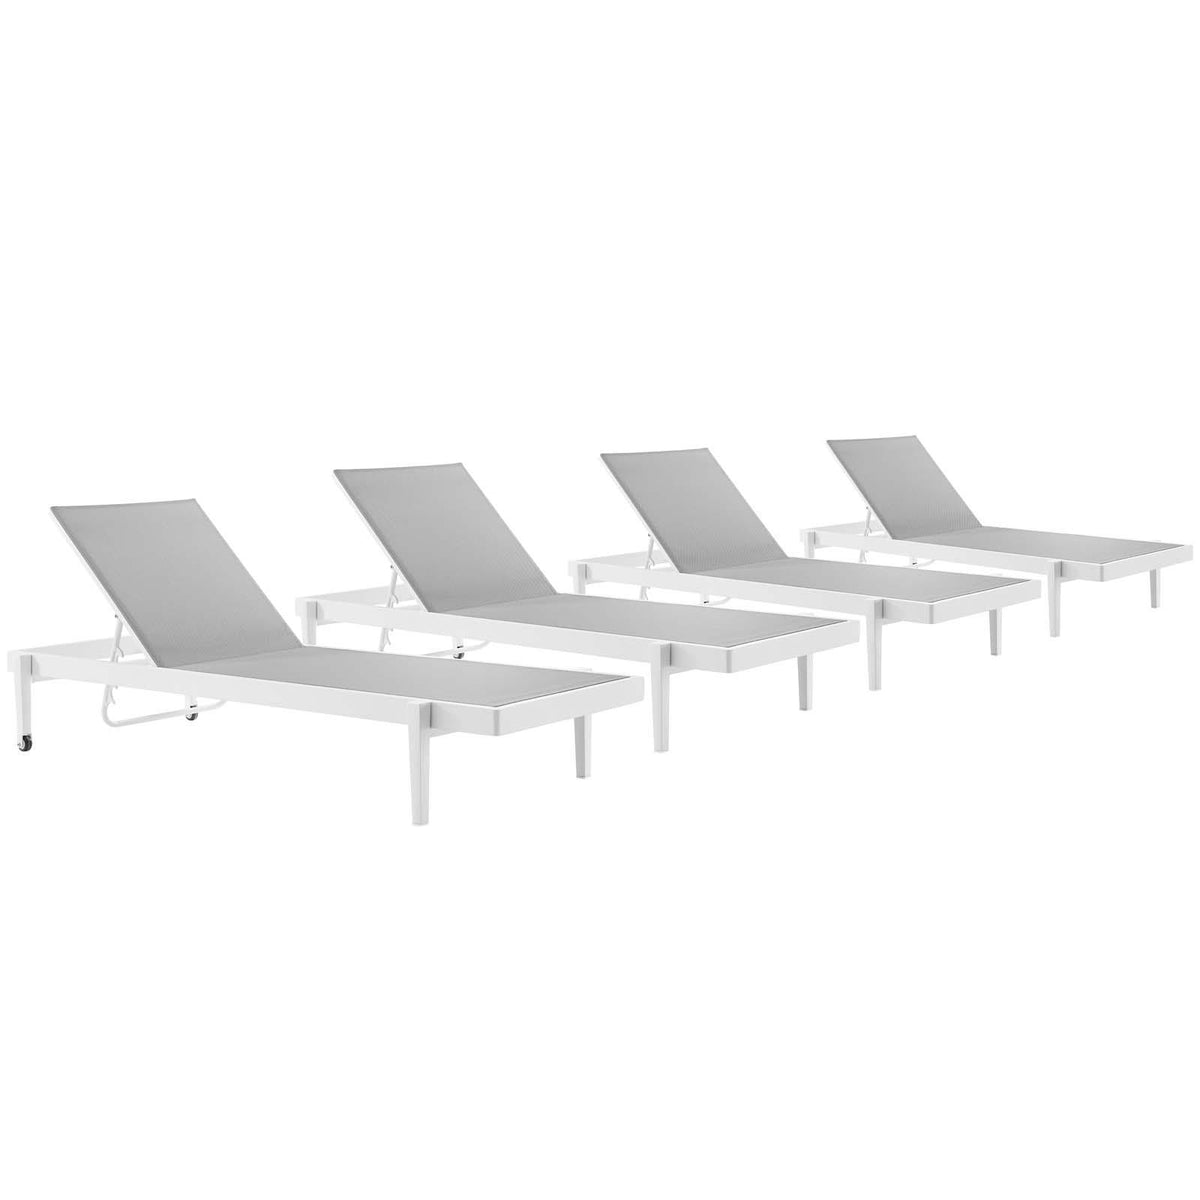 Modway Furniture Modern Charleston Outdoor Patio Aluminum Chaise Lounge Chair Set of 4 - EEI-4205